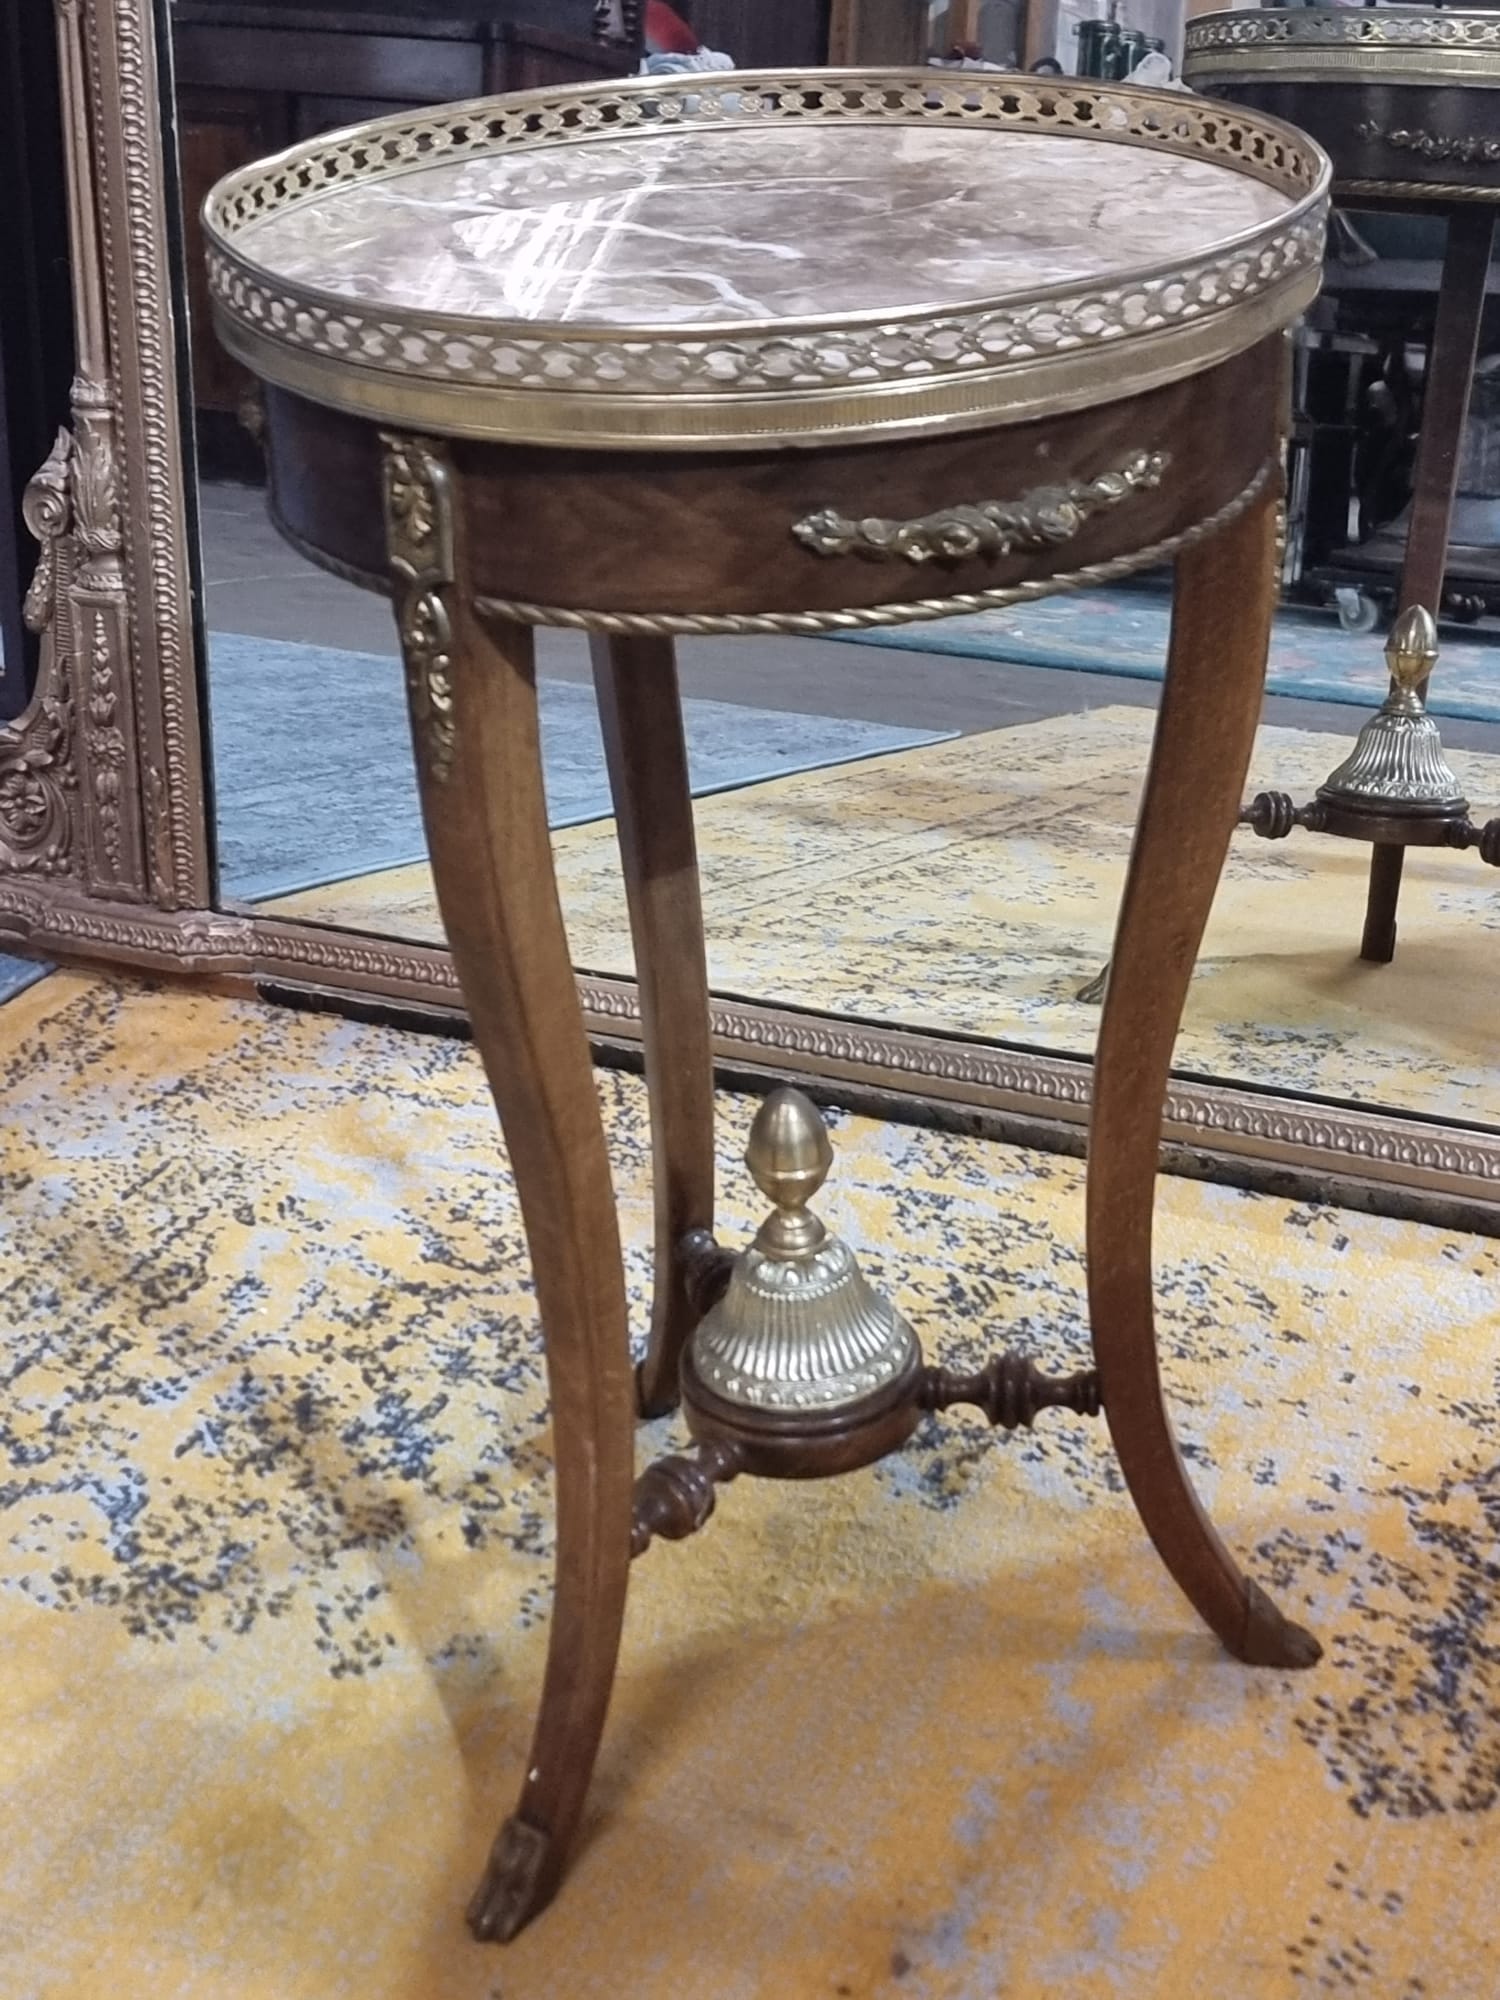 French Empire Gueridon Table Mahogany And Gilt Metal Inlay, Circular Galleried Marble top above a - Image 2 of 10